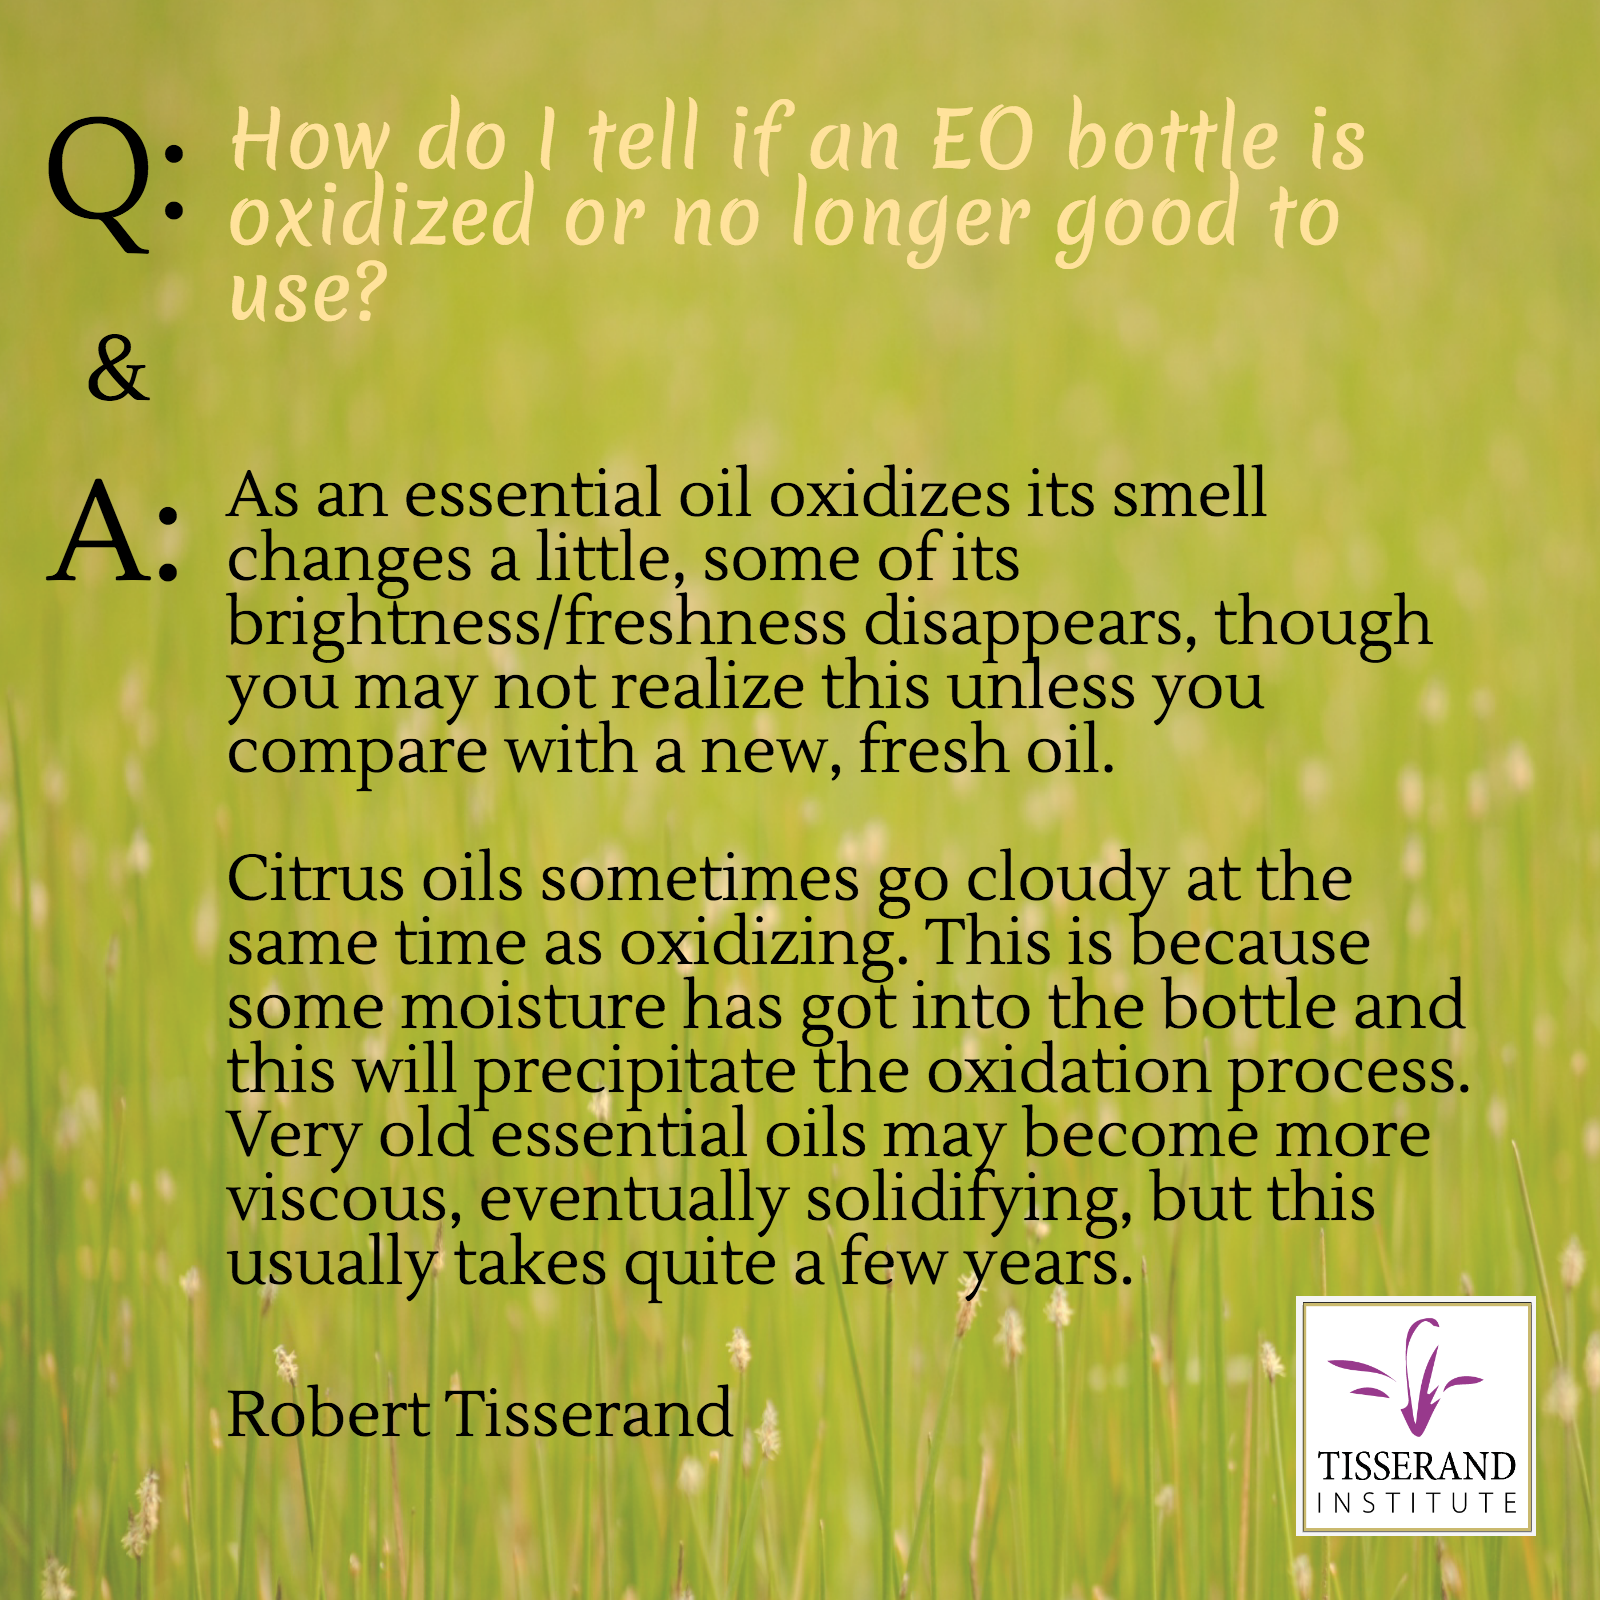 Question: How do I tell if an essential oil bottle is oxidized or no longer good to use? | Tisserand Institute Infographic #Tisserand #TisserandInstitute #Infographic #EssentialOils #information #study #research #safety #roberttisserand #applications #oxidized